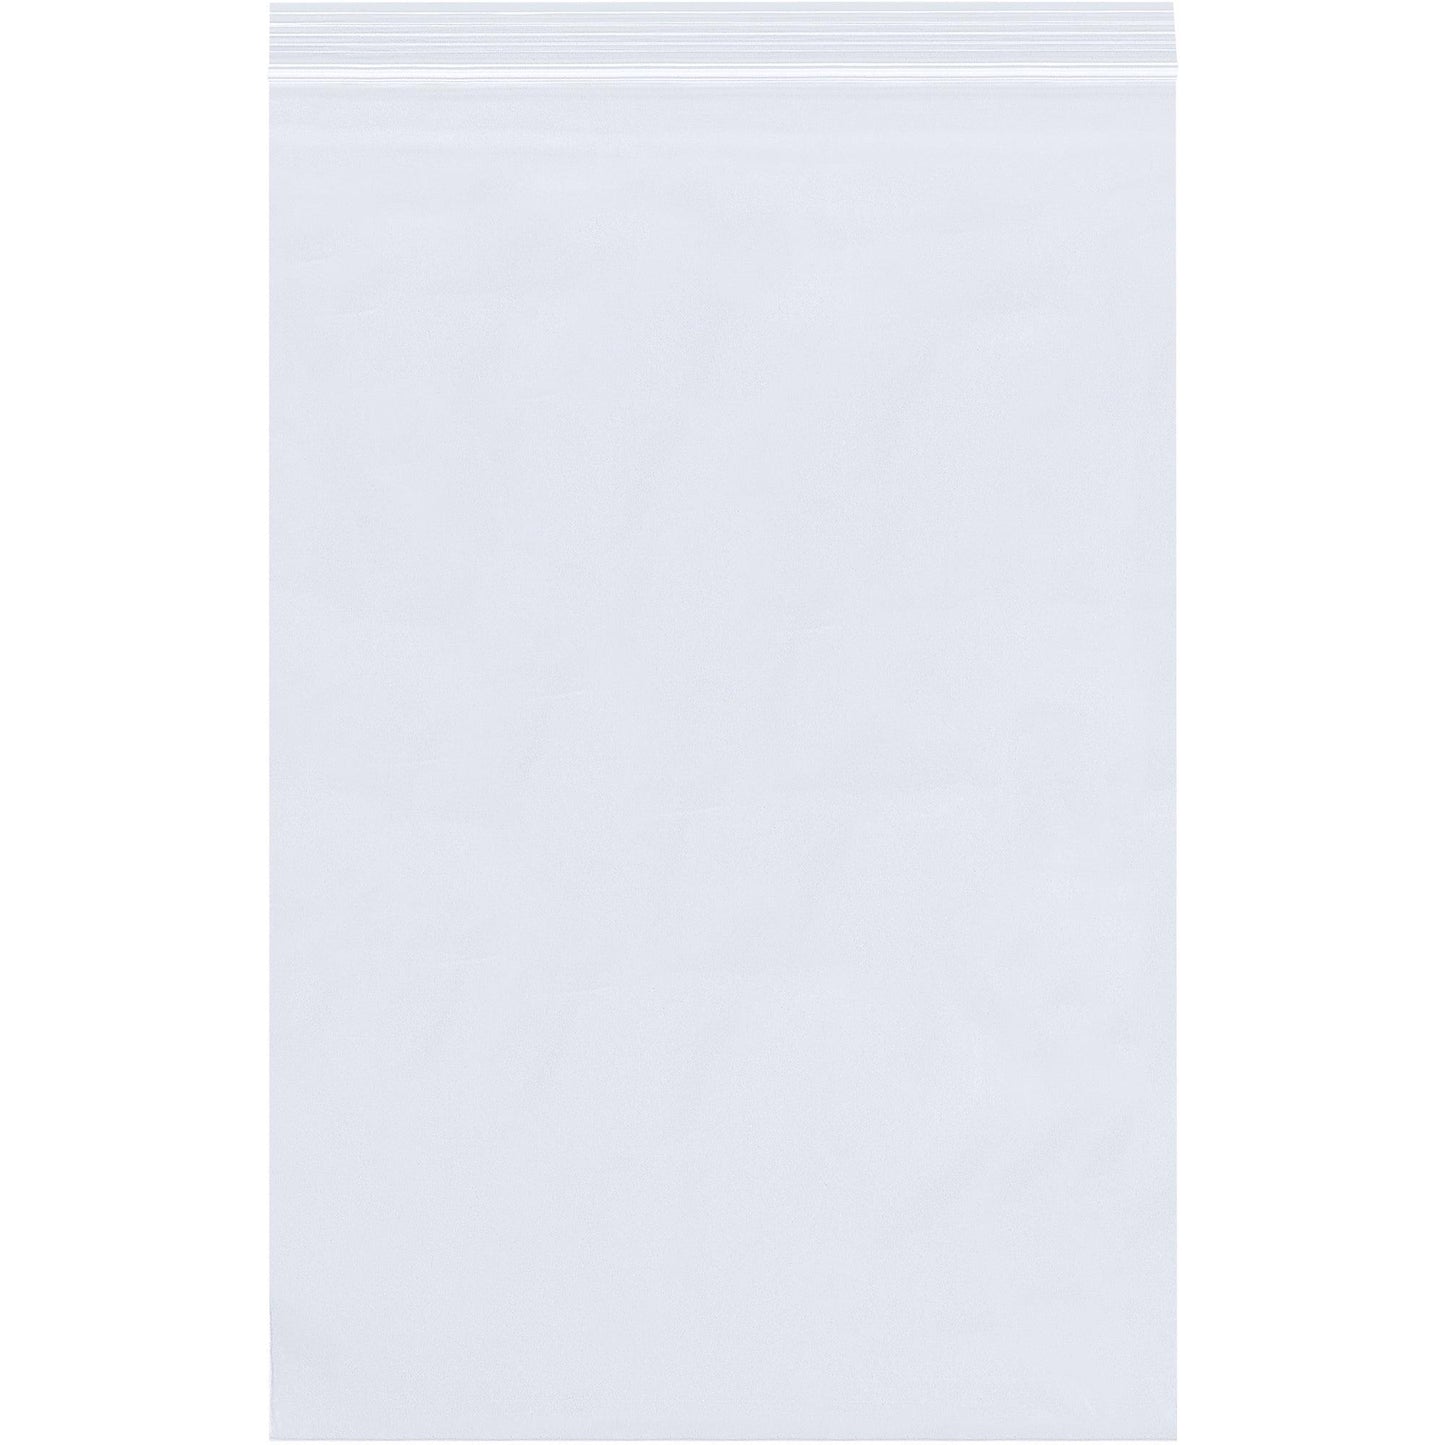 6 x 15" - 2 Mil Reclosable Poly Bags - PB3627